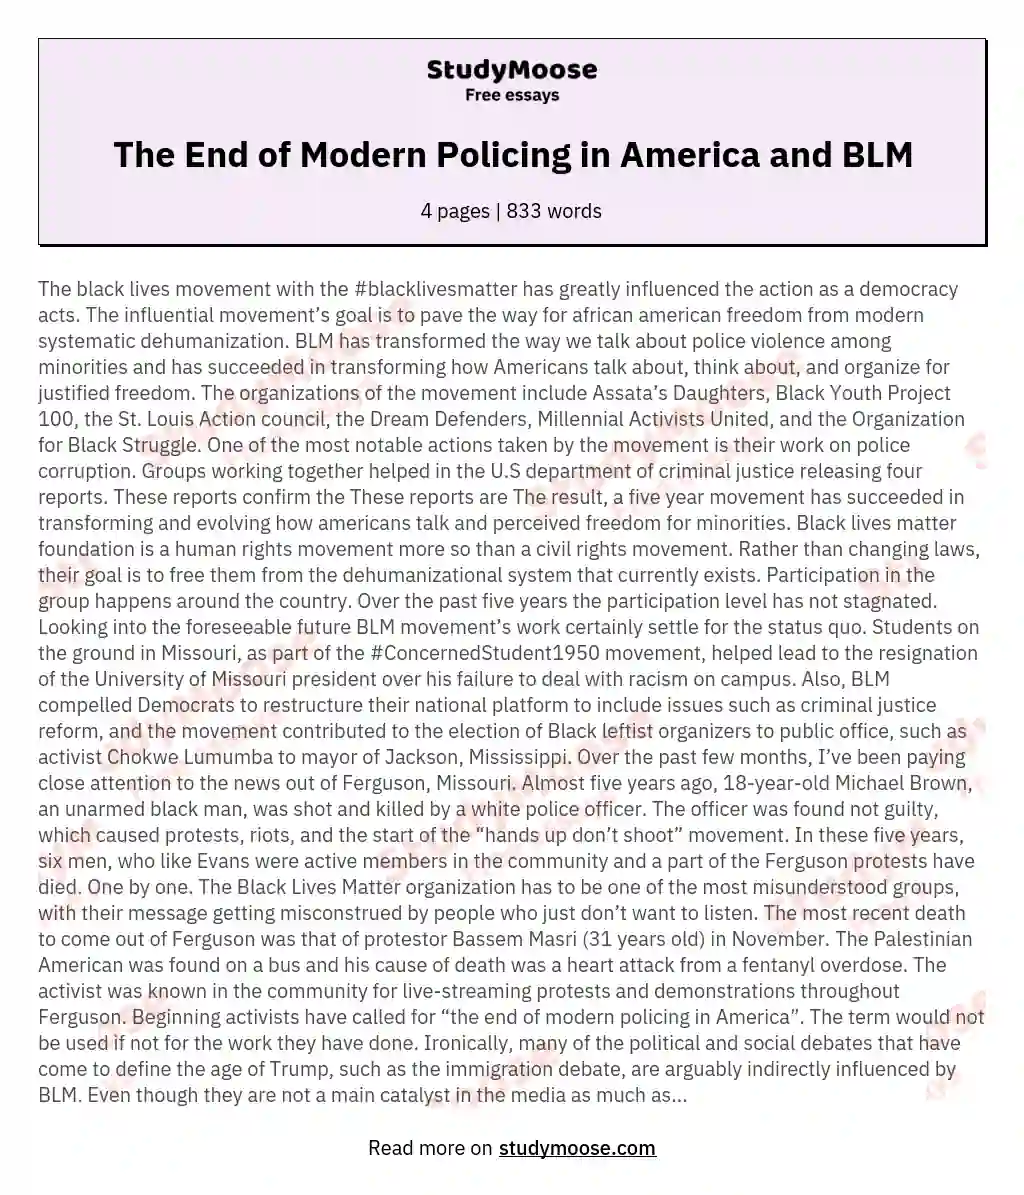 The End of Modern Policing in America and BLM essay